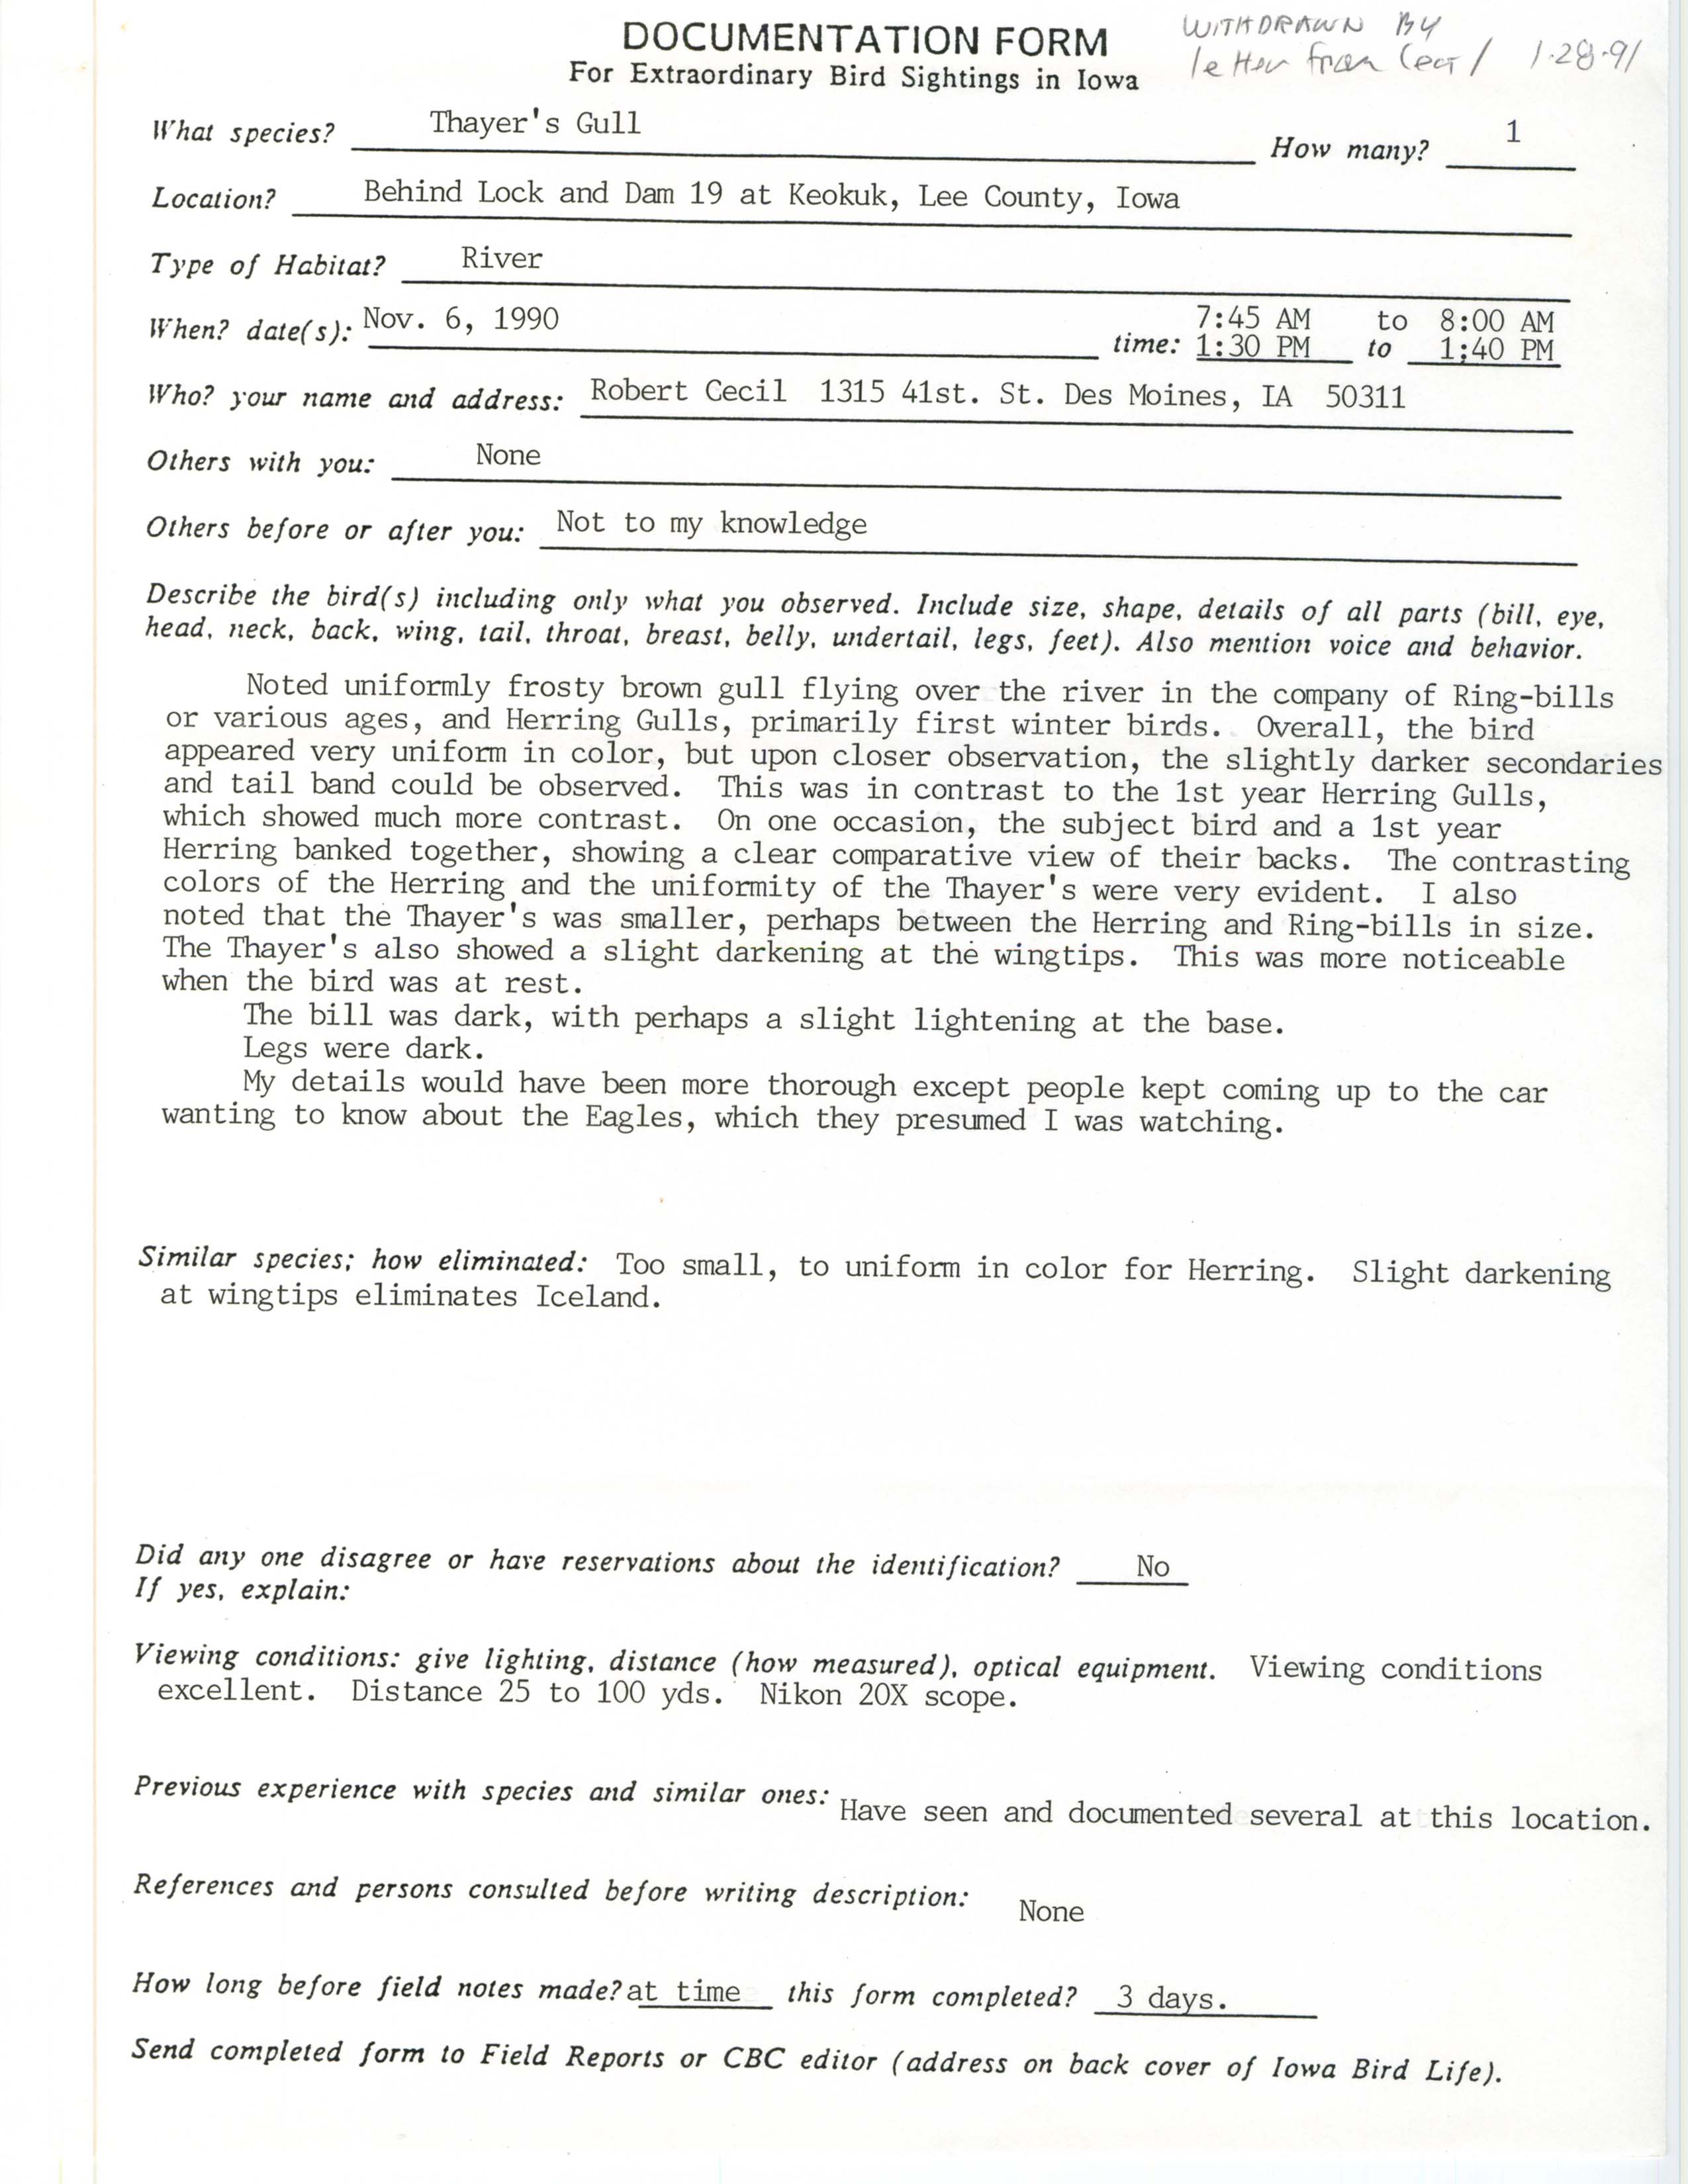 Rare bird documentation form for Thayer's Gull at Lock and Dam 19, 1990